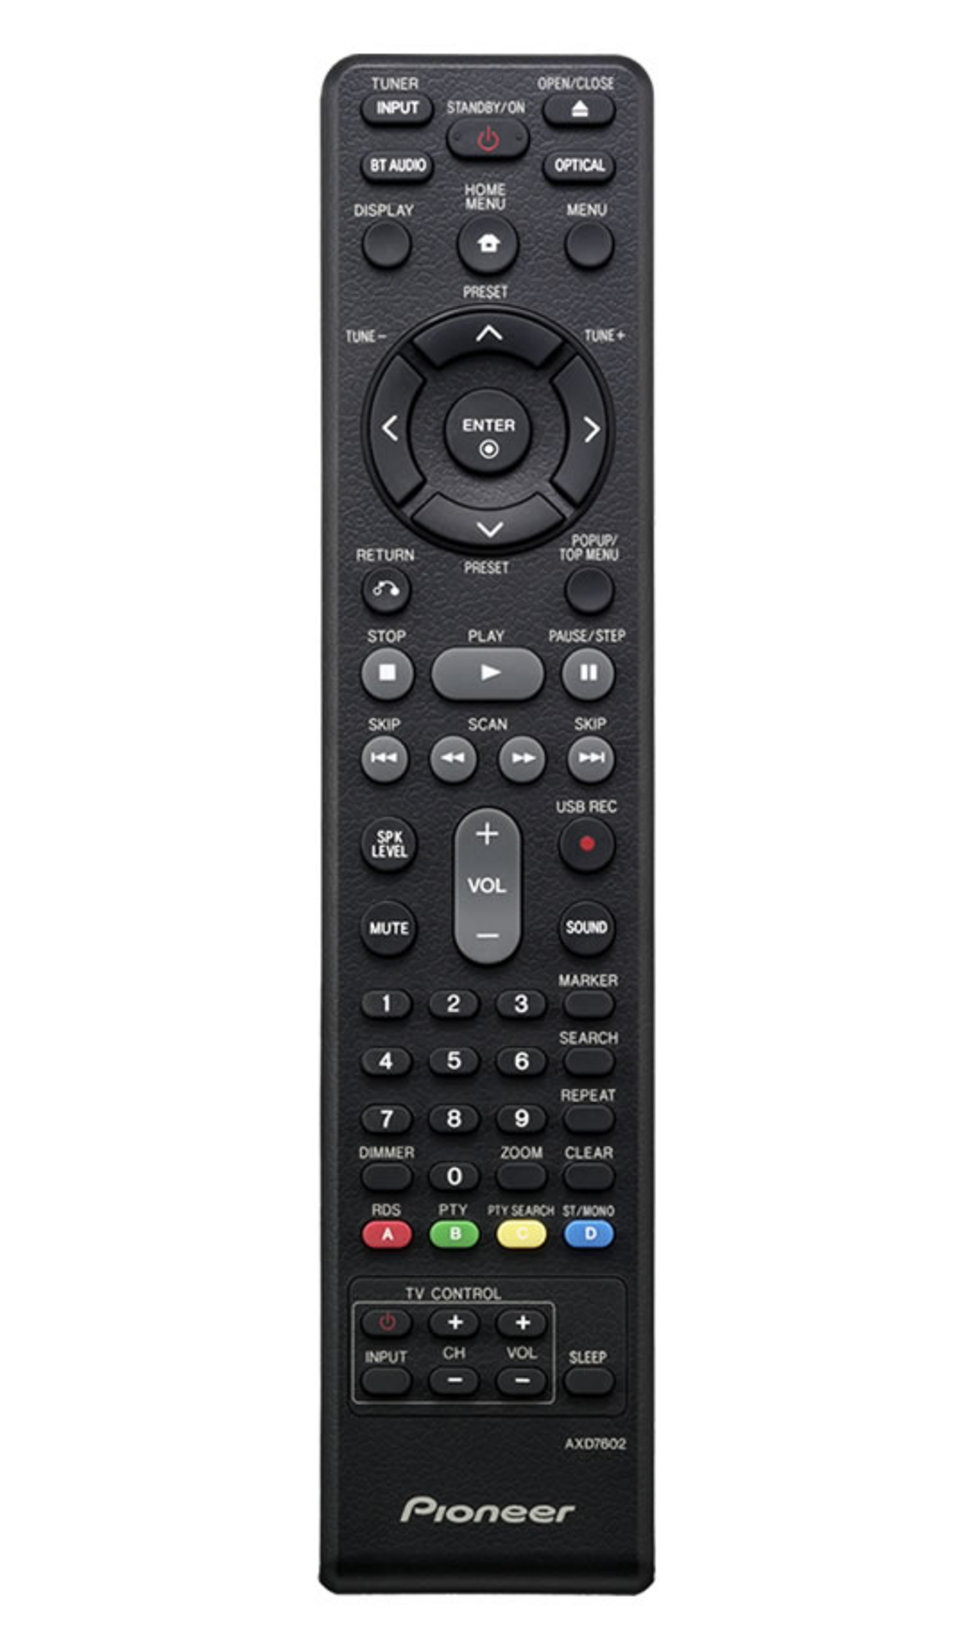 Pioneer BCS-FS505 replacement remote control different look AXD7602 - AKB72913843